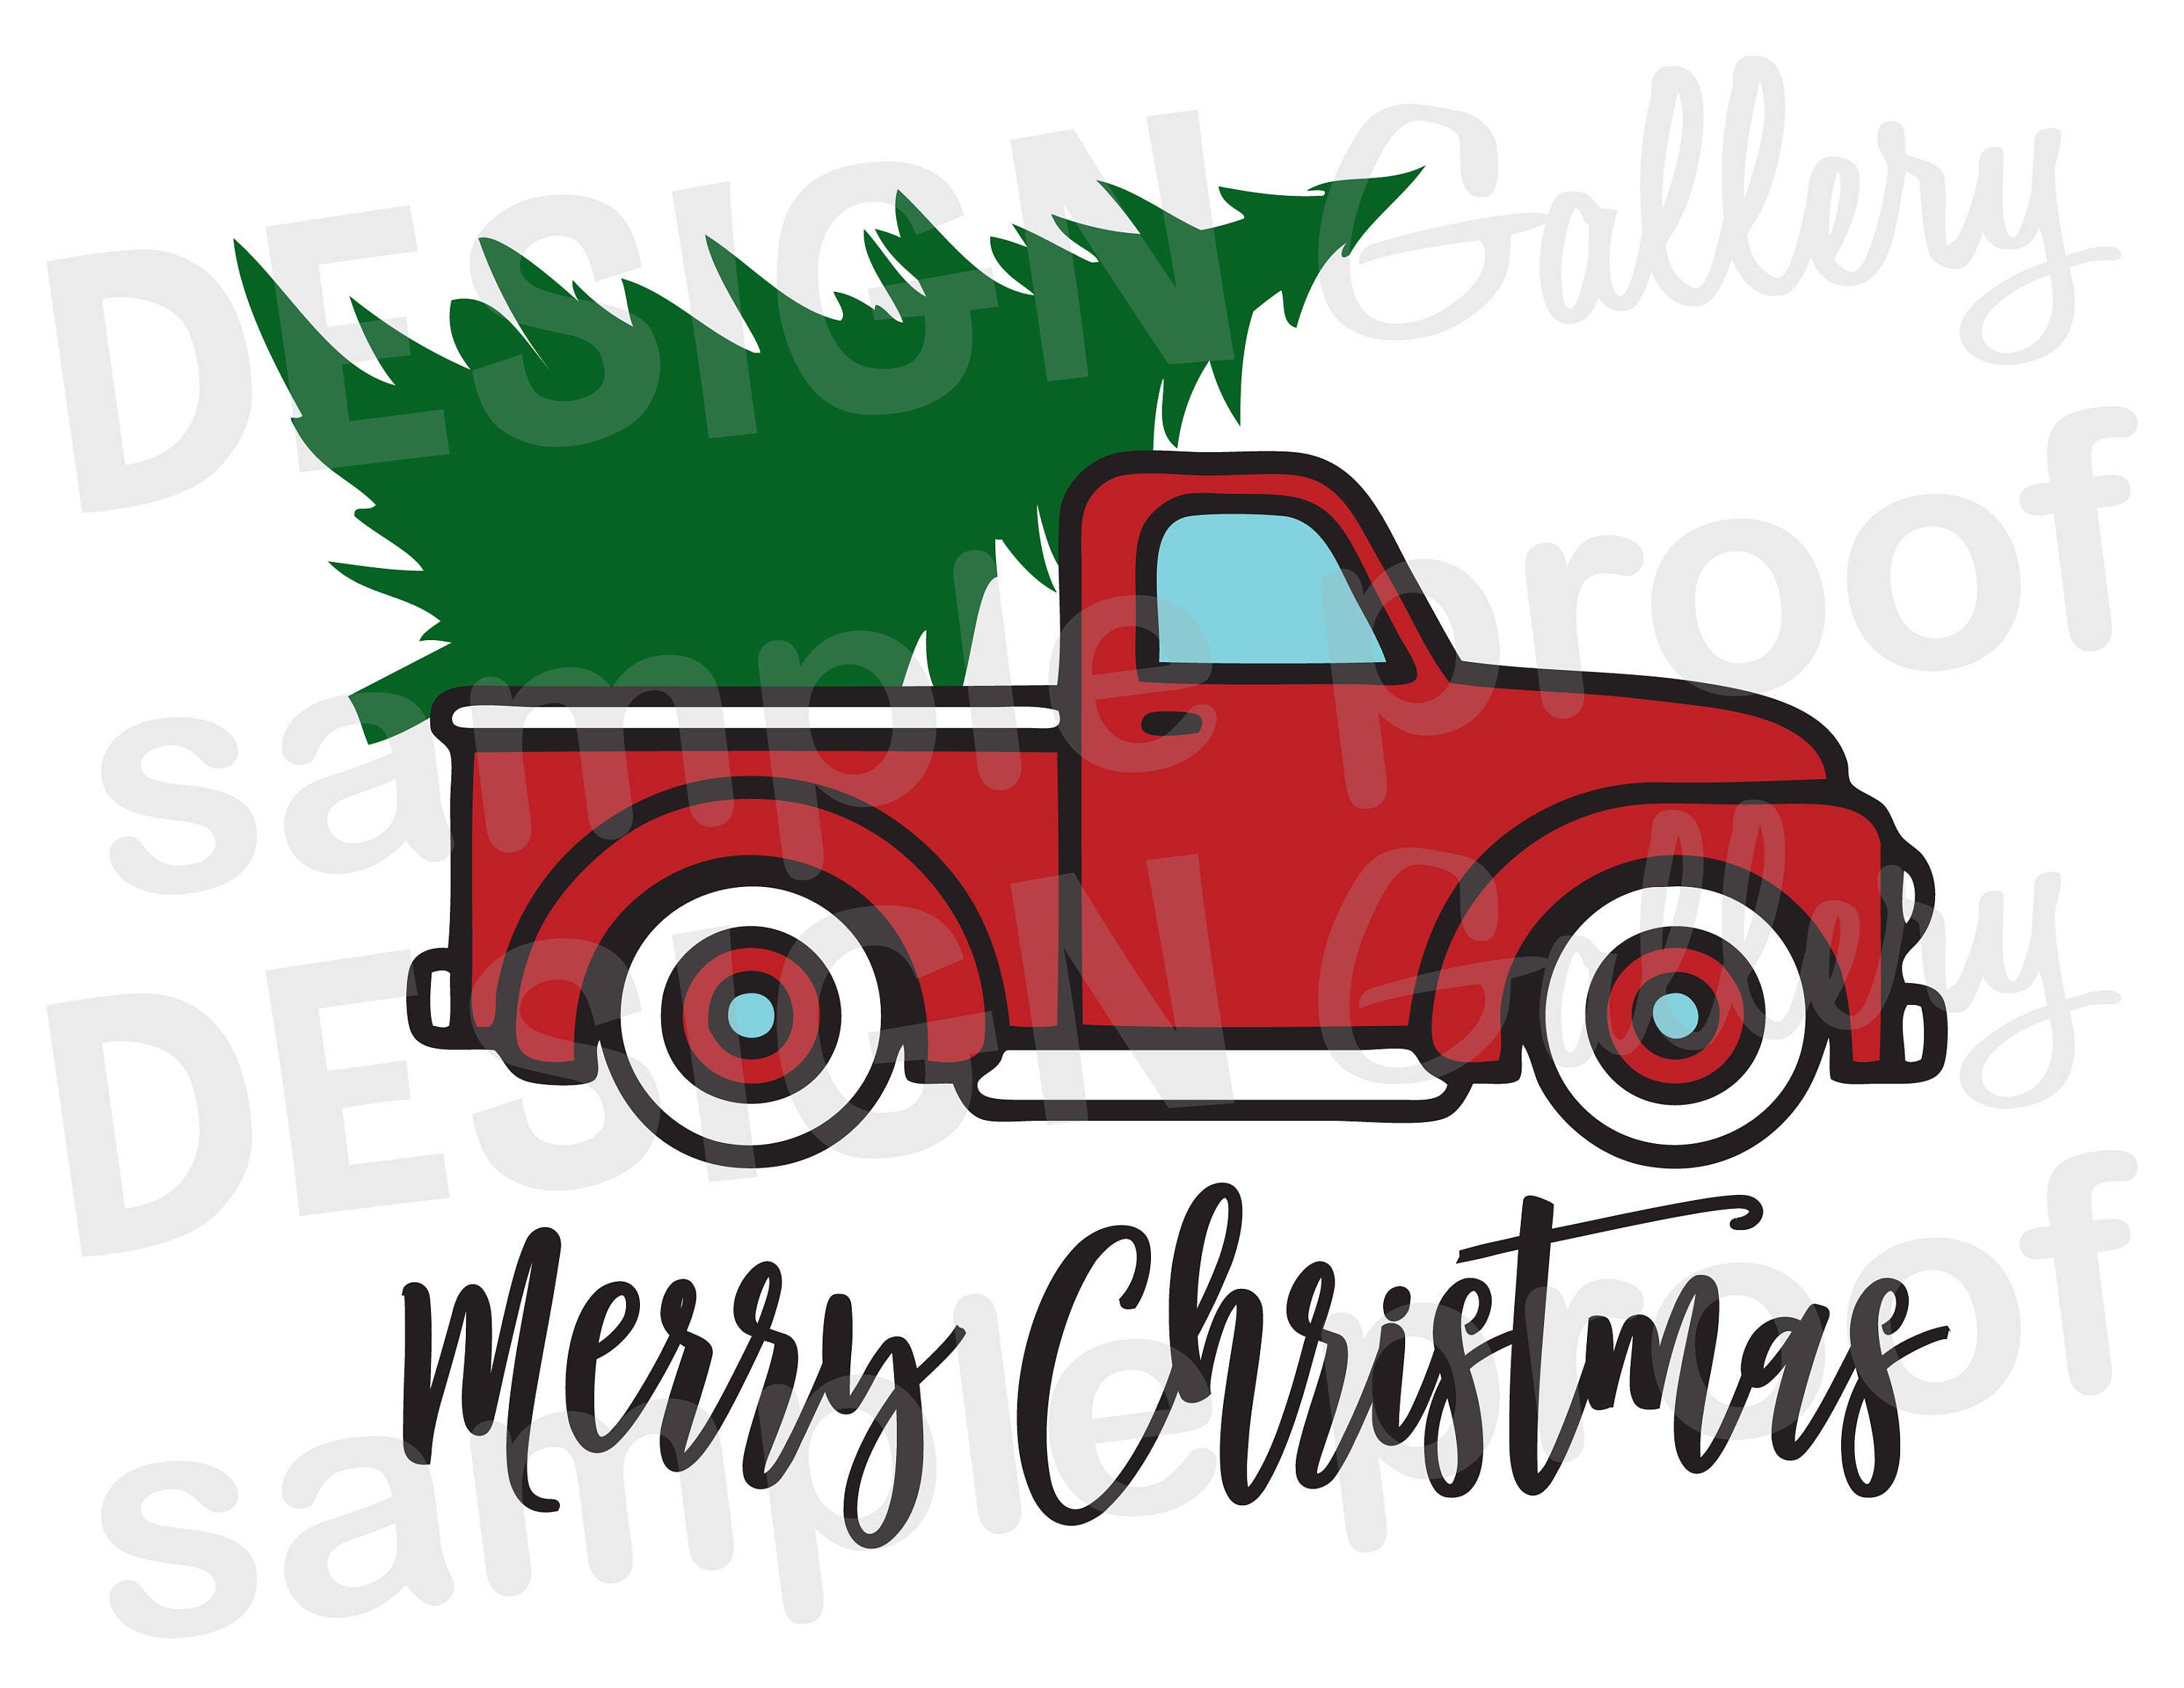 Truck Christmas Tree SVG DXF cut & JPG png image files | Etsy